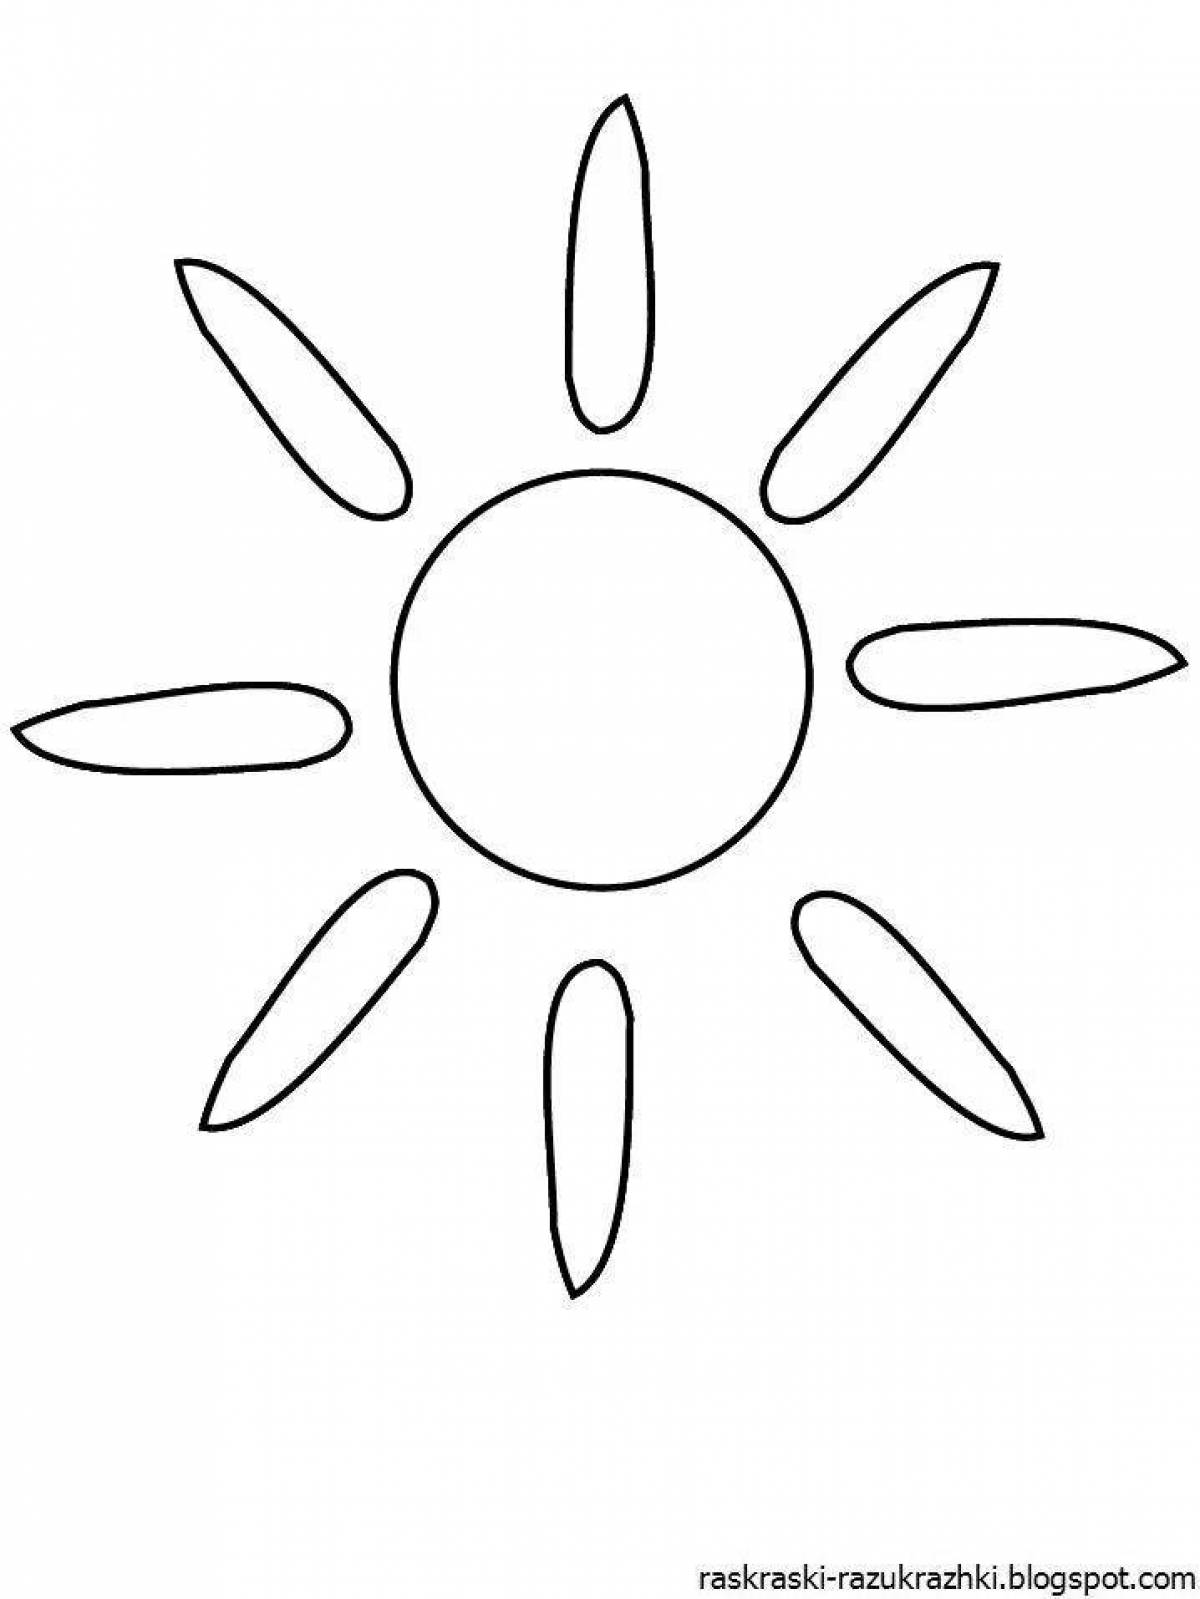 Fancy sun coloring book for 2-3 year olds